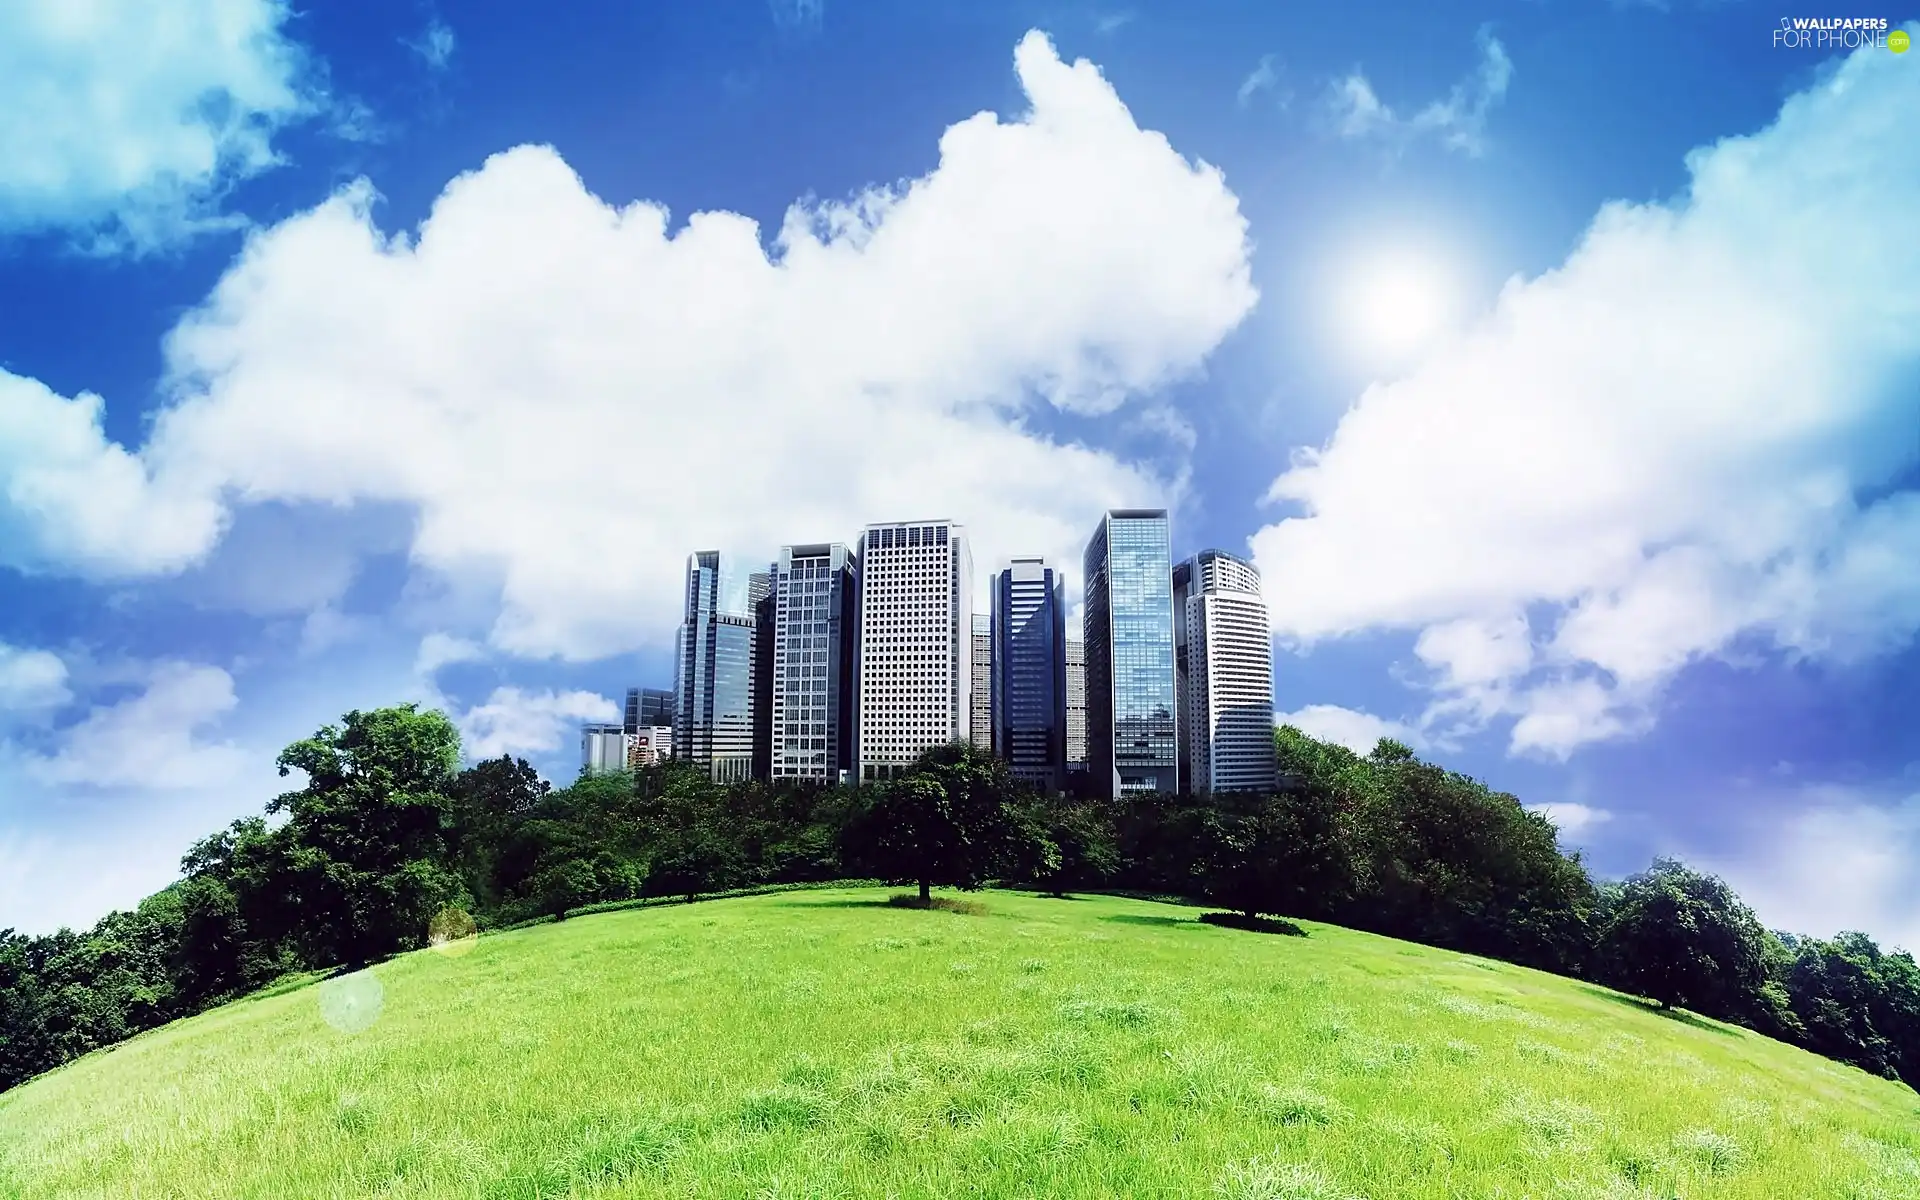 viewes, Hill, skyscrapers, clouds, Lawn, trees